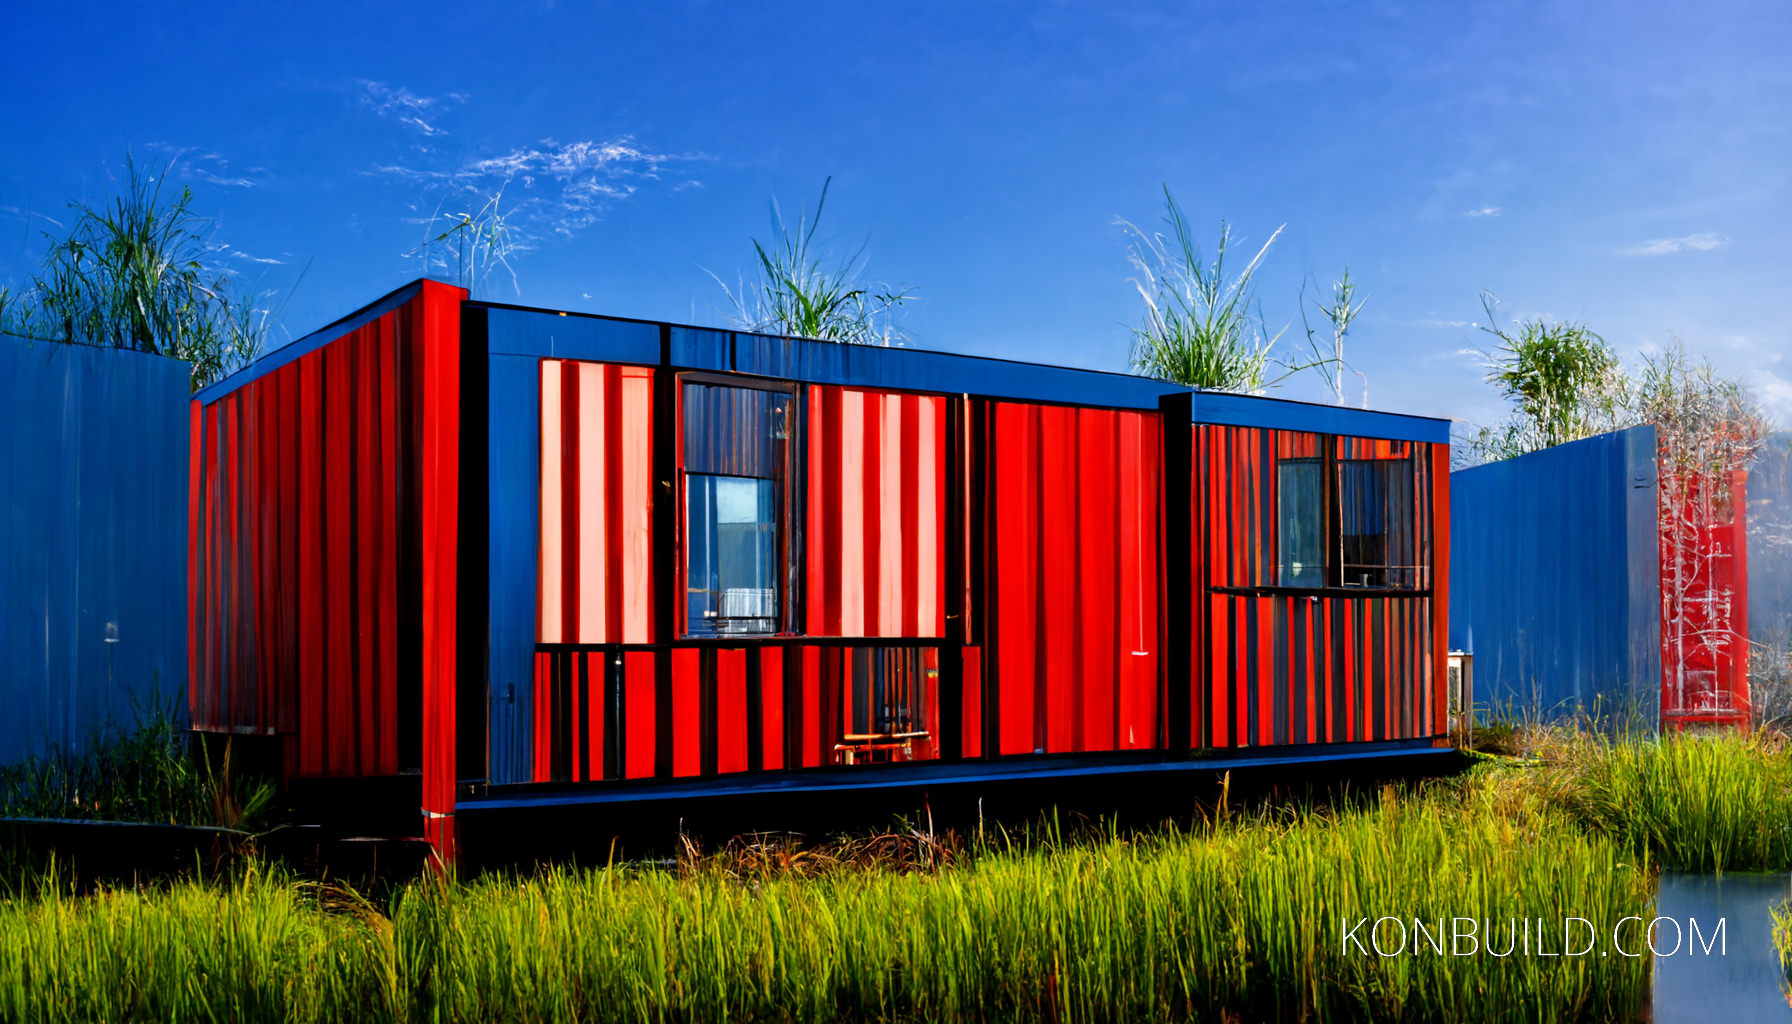 Container home artwork created in MidJourney AI. Built next to a swamp with a bright blue sky.